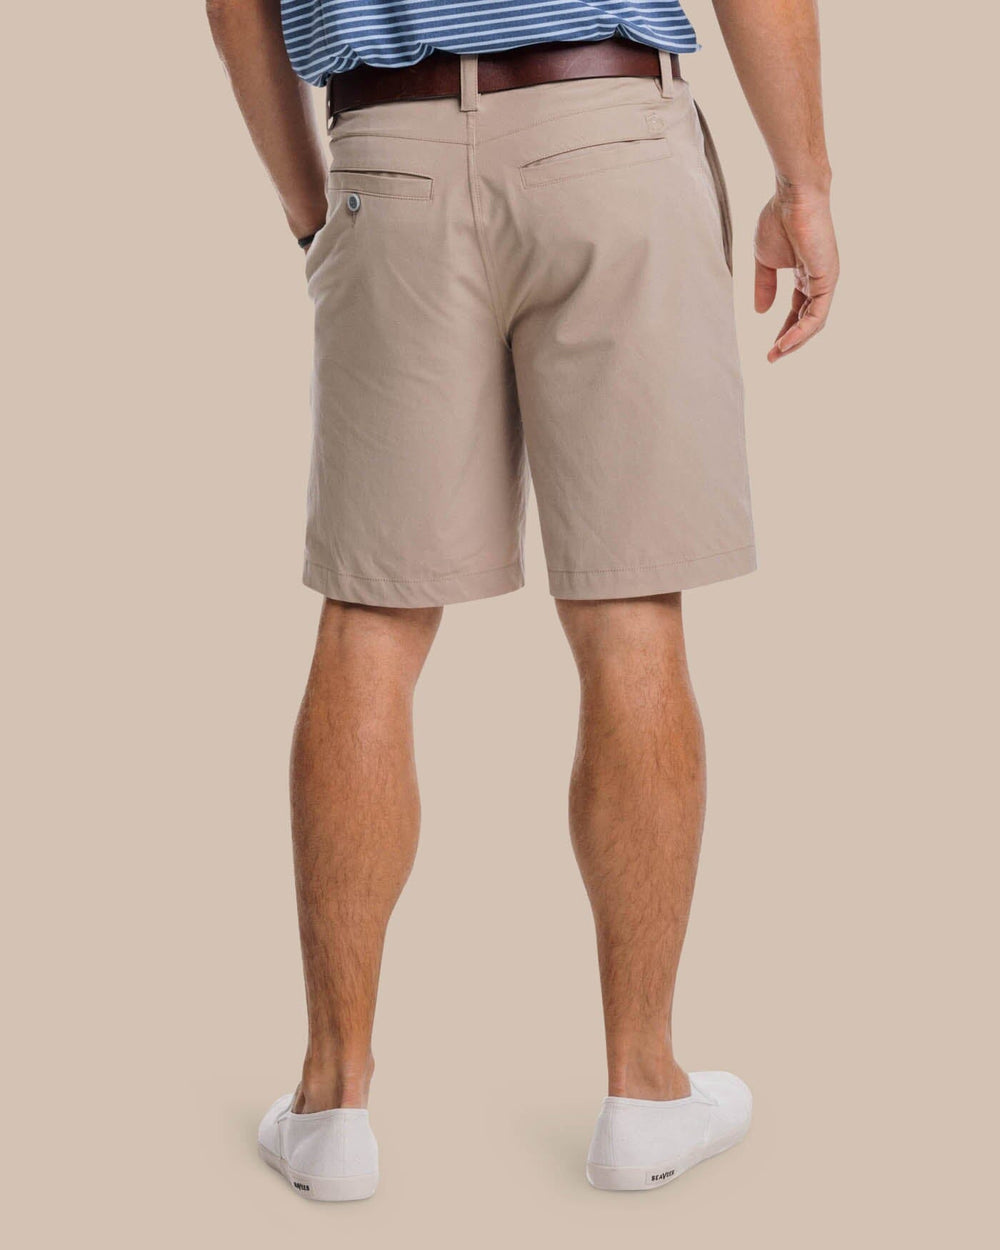 The back view of the Southern Tide T3 Gulf 9 Inch Performance Short by Southern Tide - Sandstone Khaki